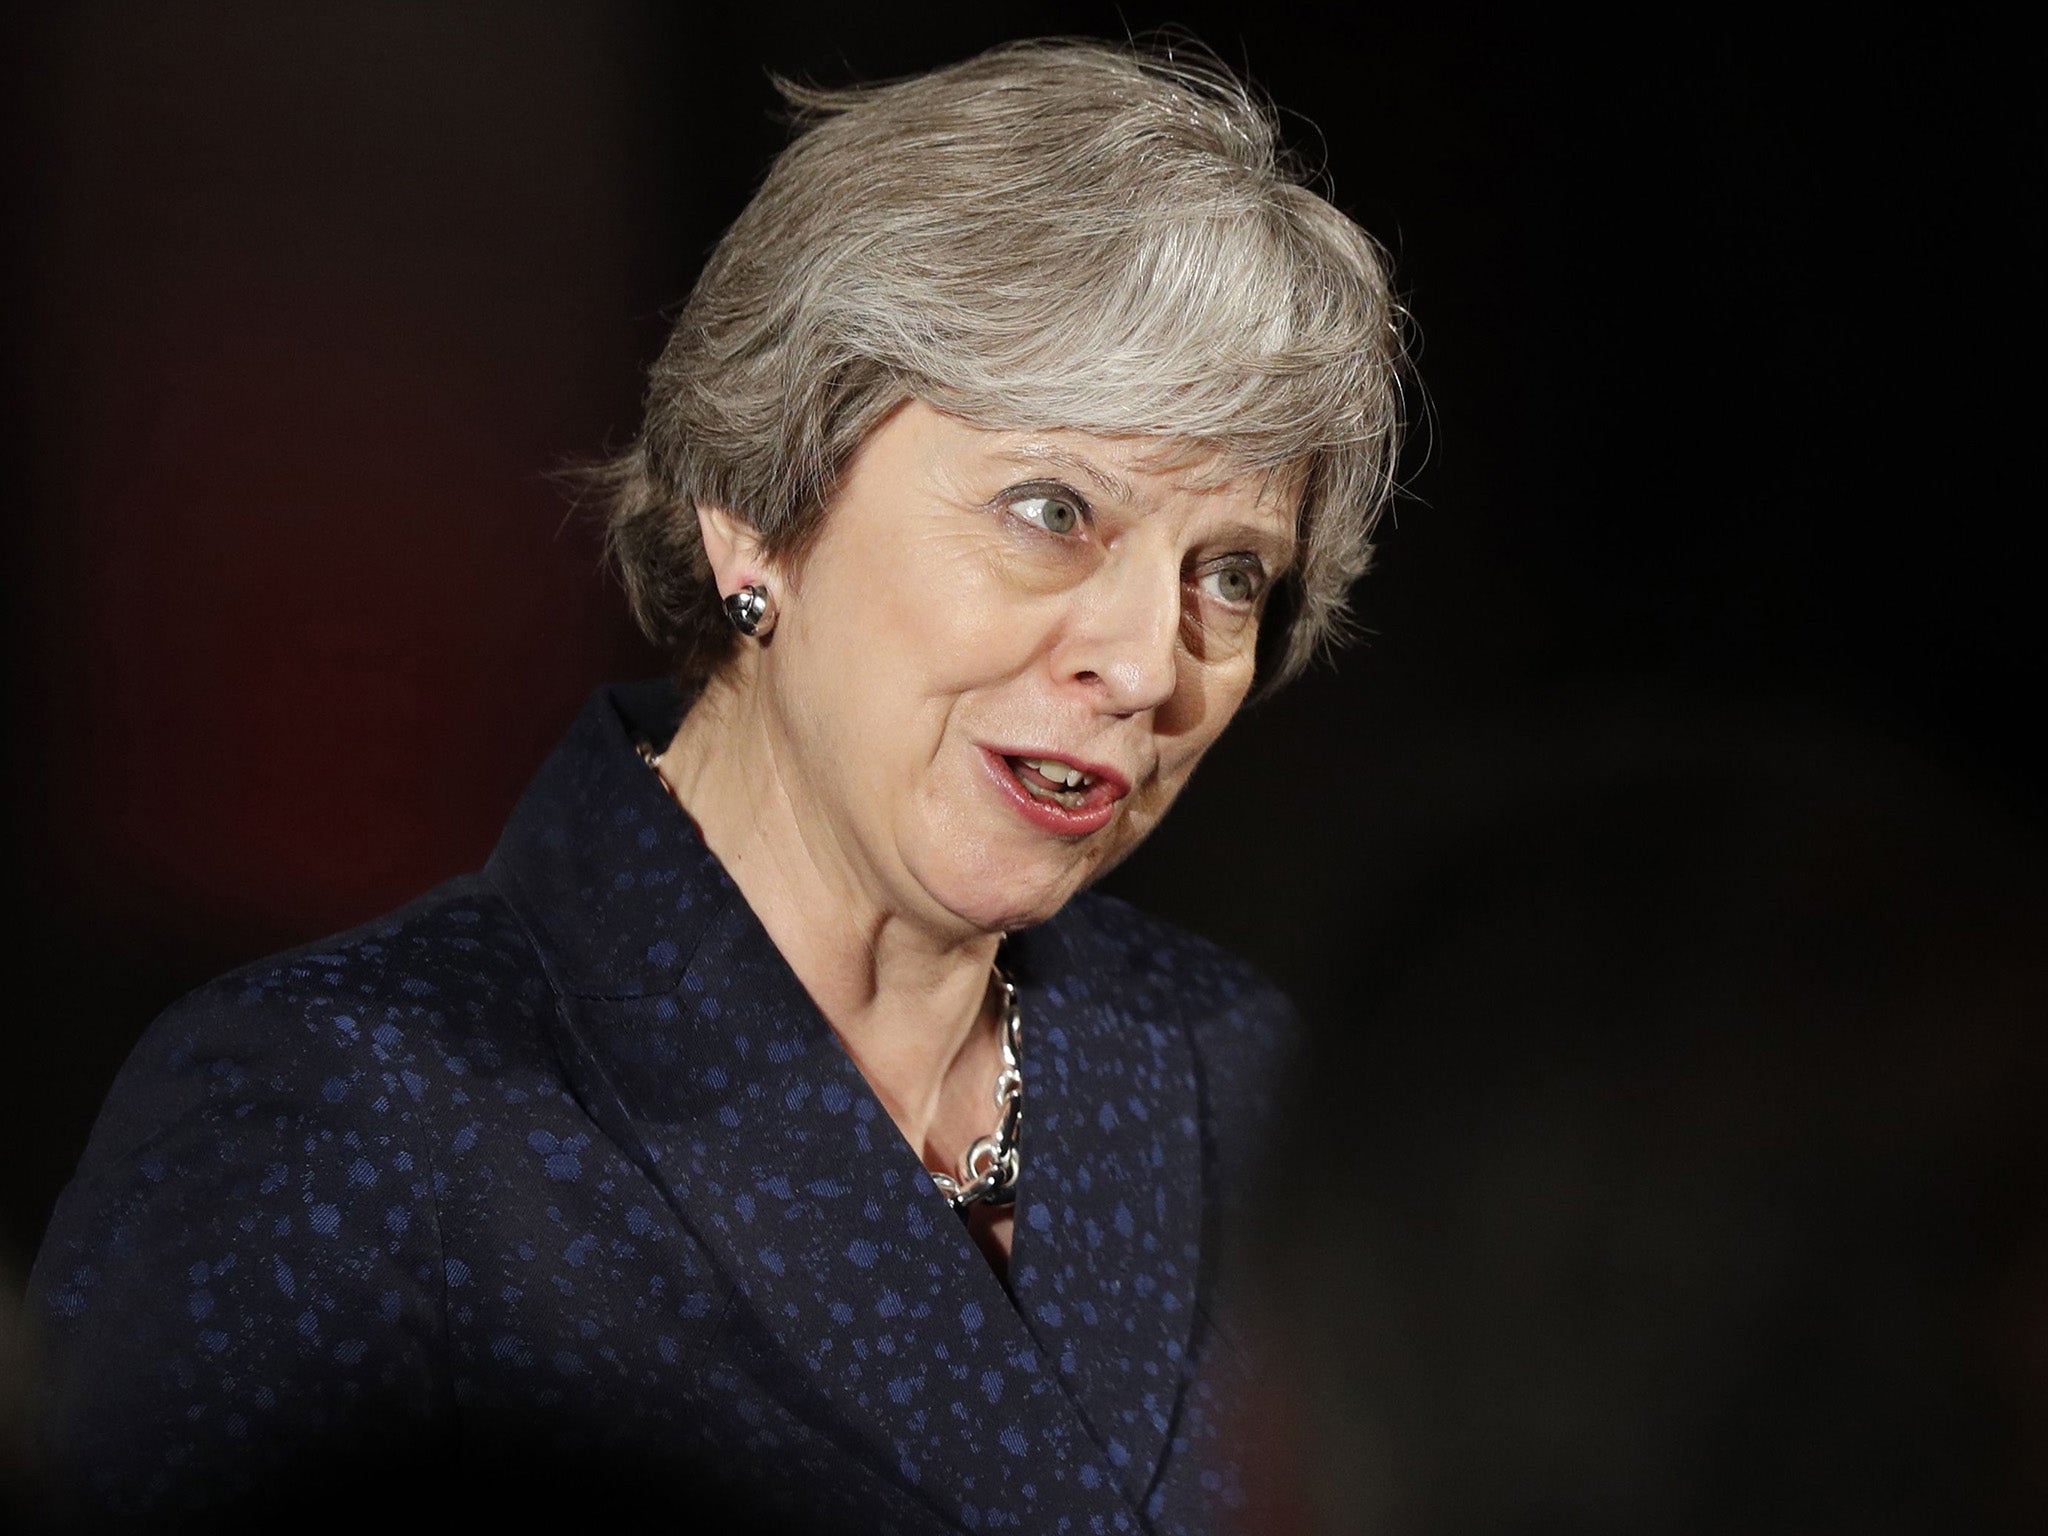 The Prime Minister has made taking down extremist content from the internet a key priority